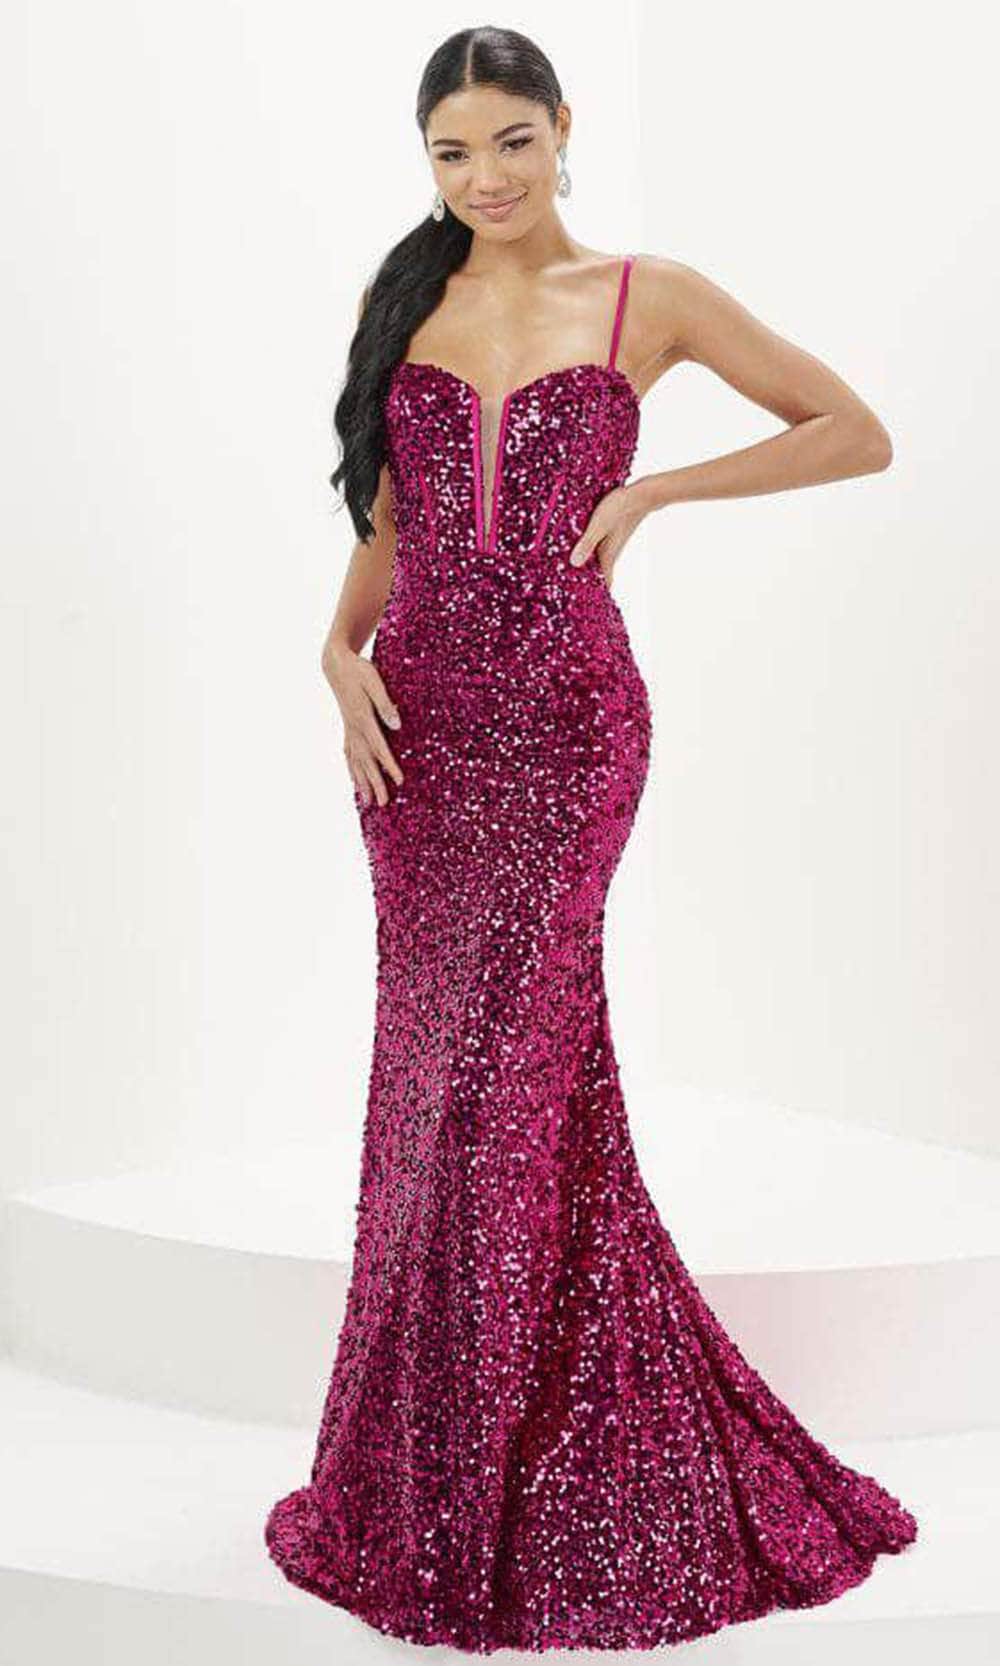 Tiffany Designs 16081 - Plunging Sweetheart Sequin Prom Gown Evening Dresses 0 / Magenta